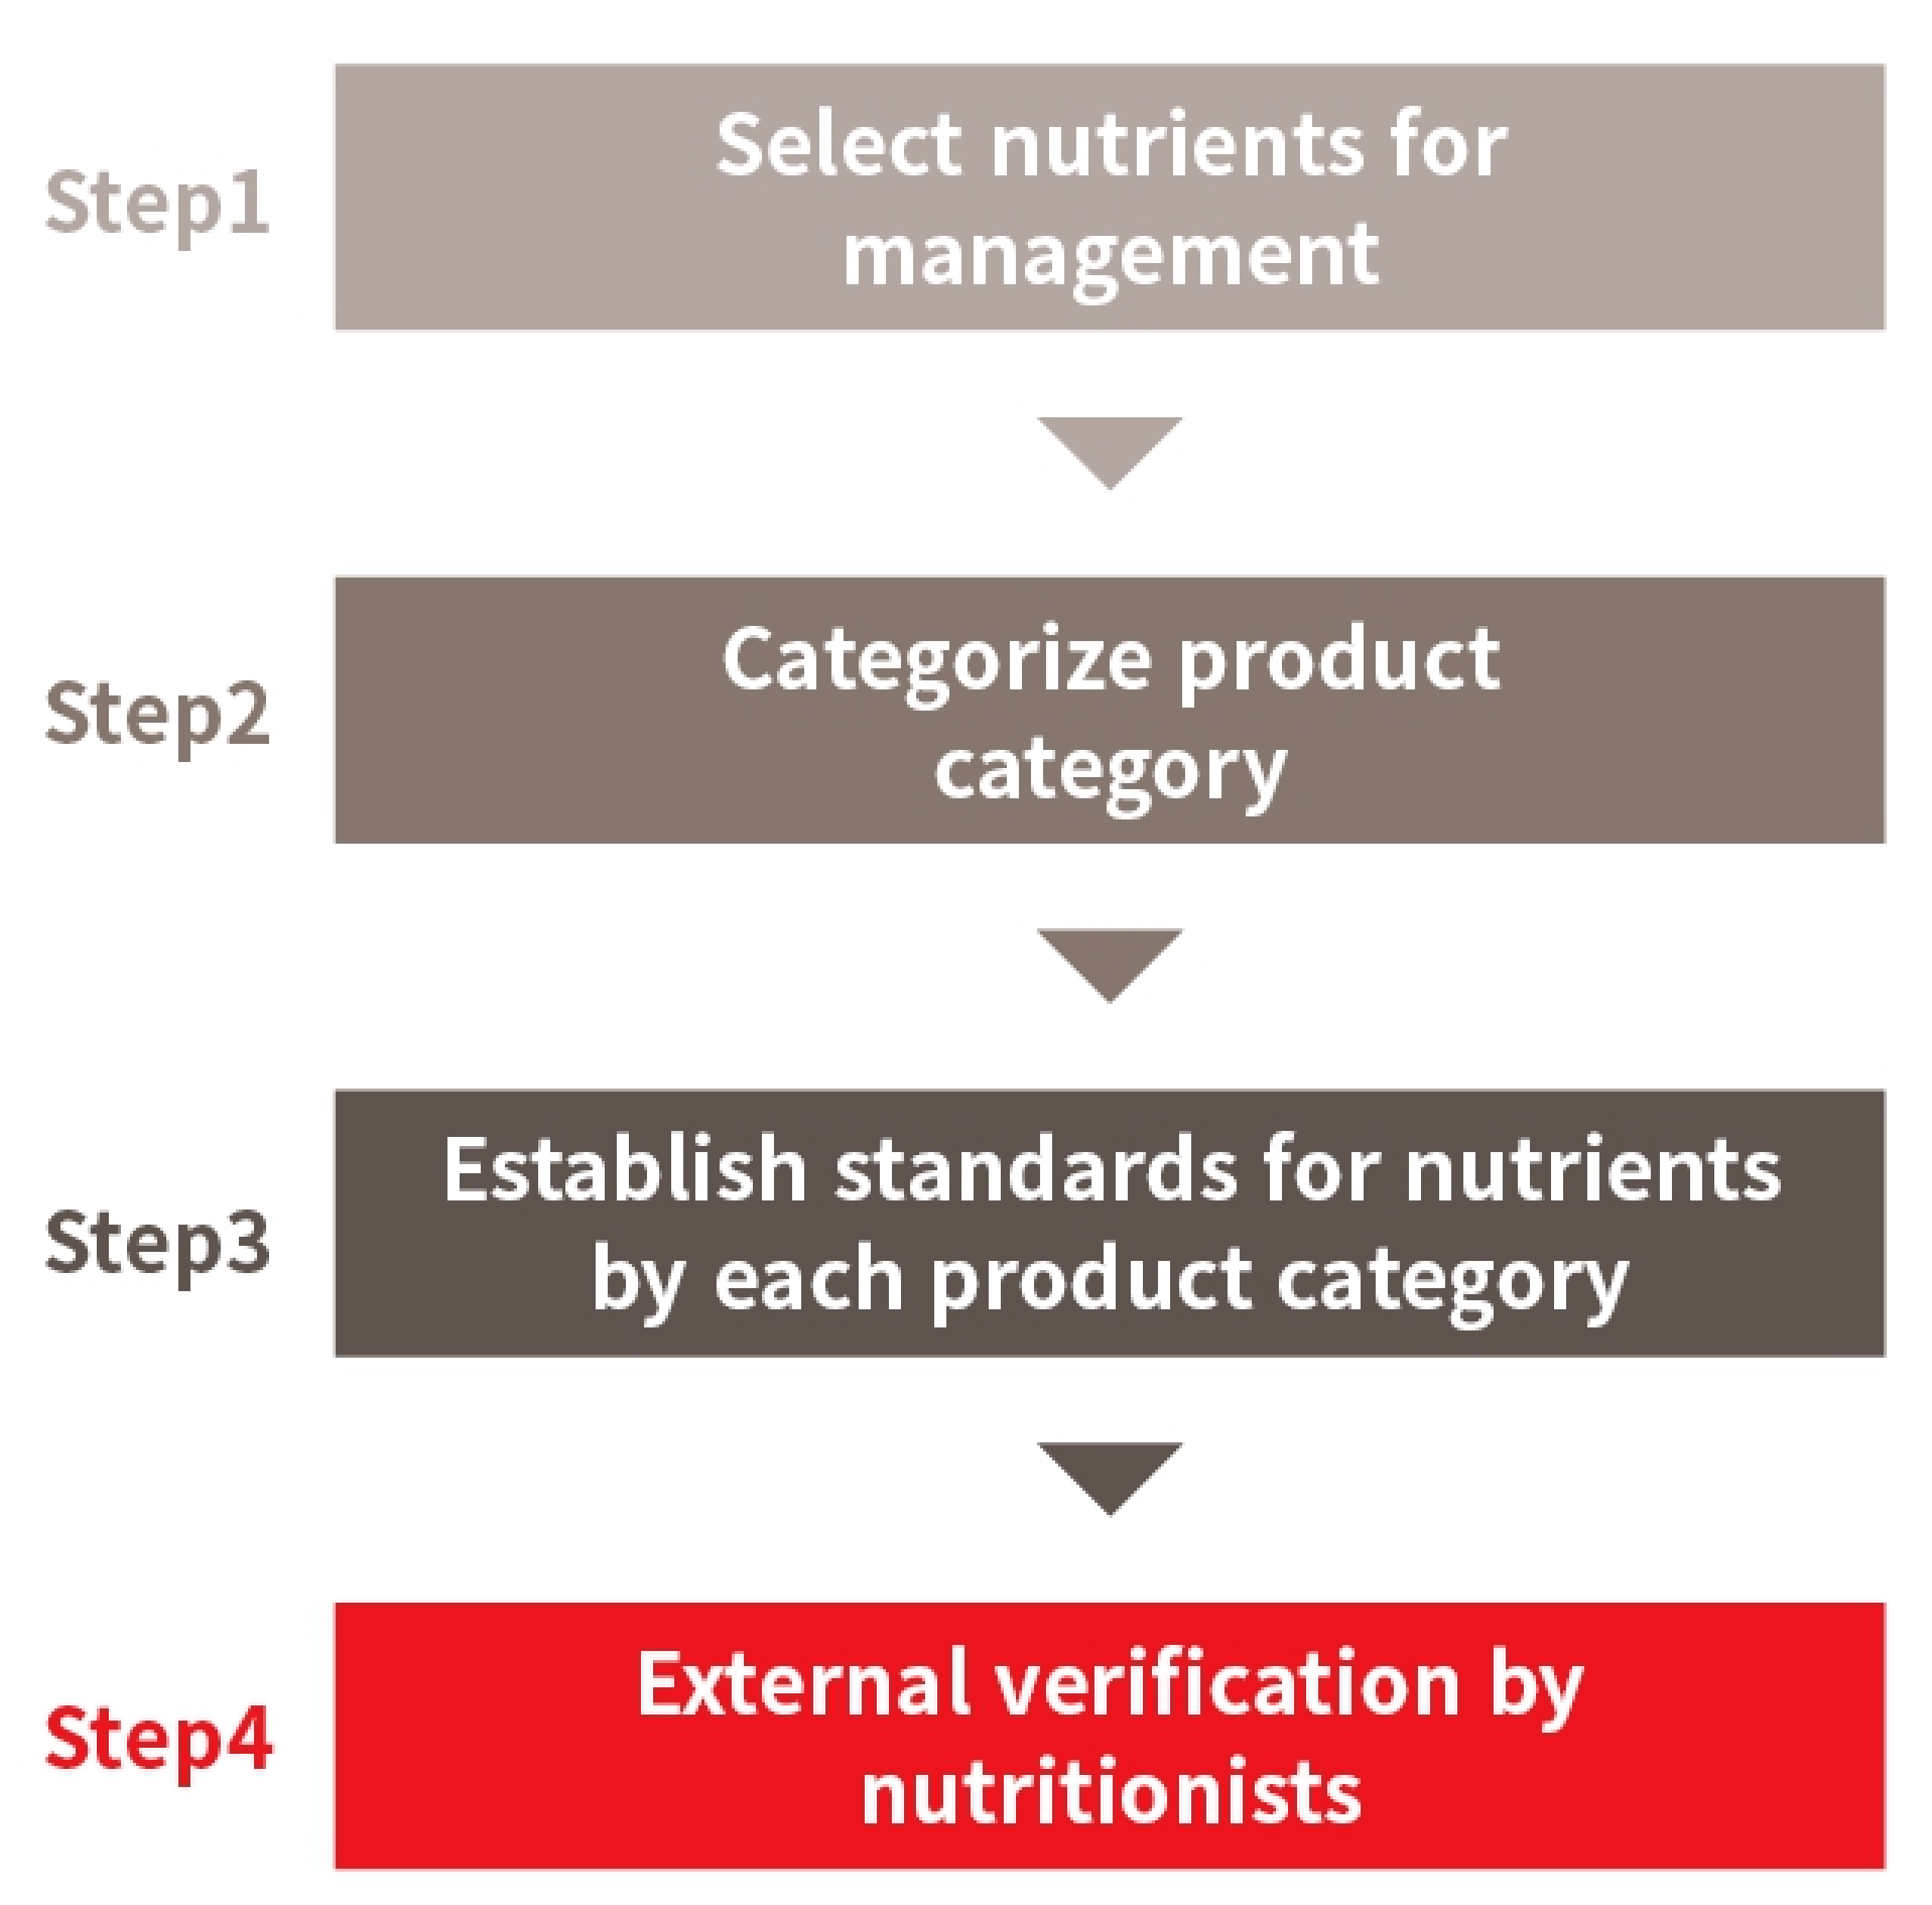 Establishment of the CJ Nutrition Criteria by each product category